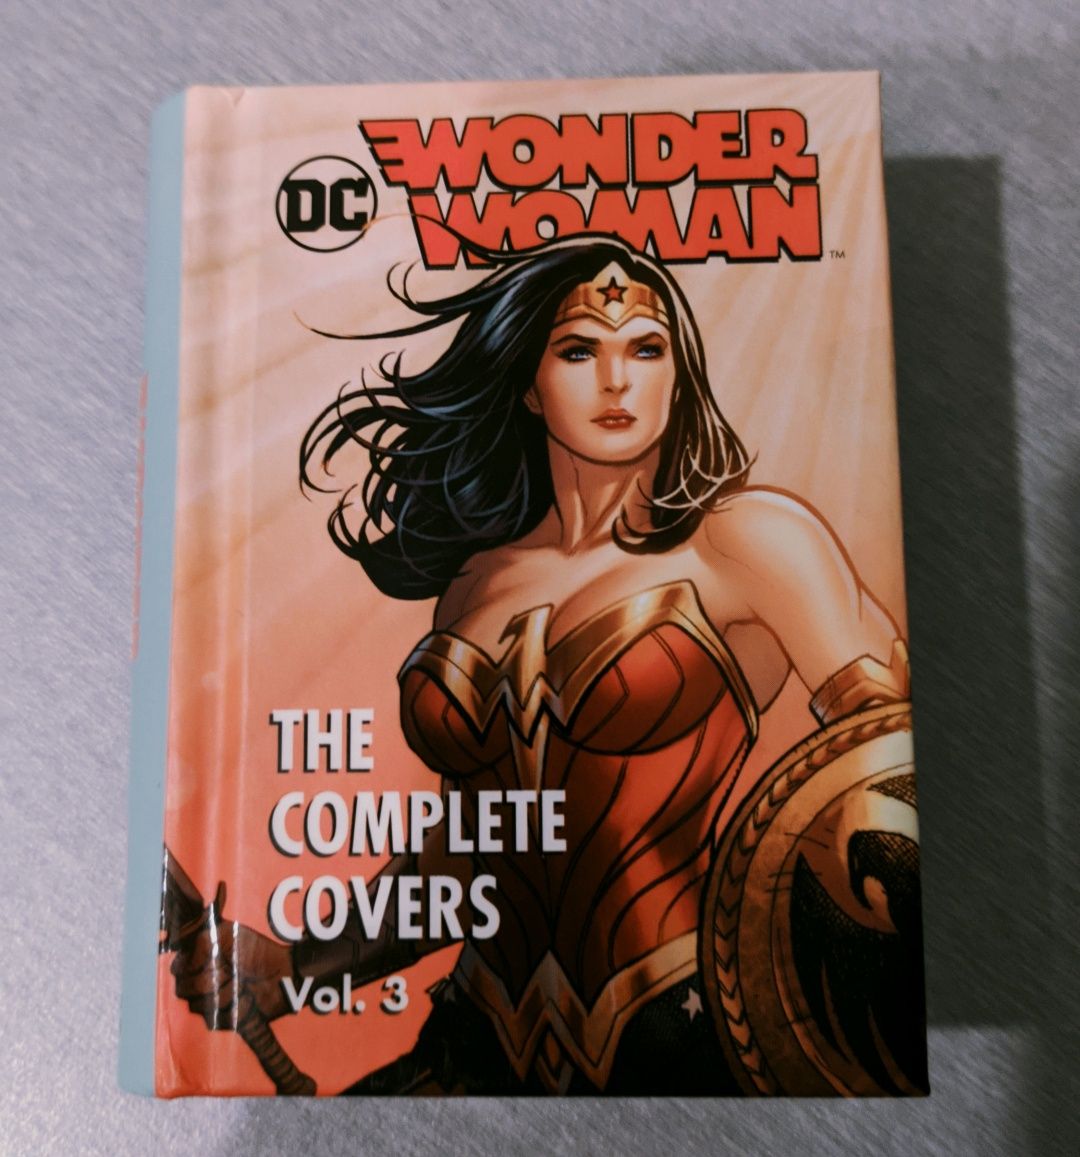 DC Wonder Woman - The complete covers vol.3. Nowy. Okazja